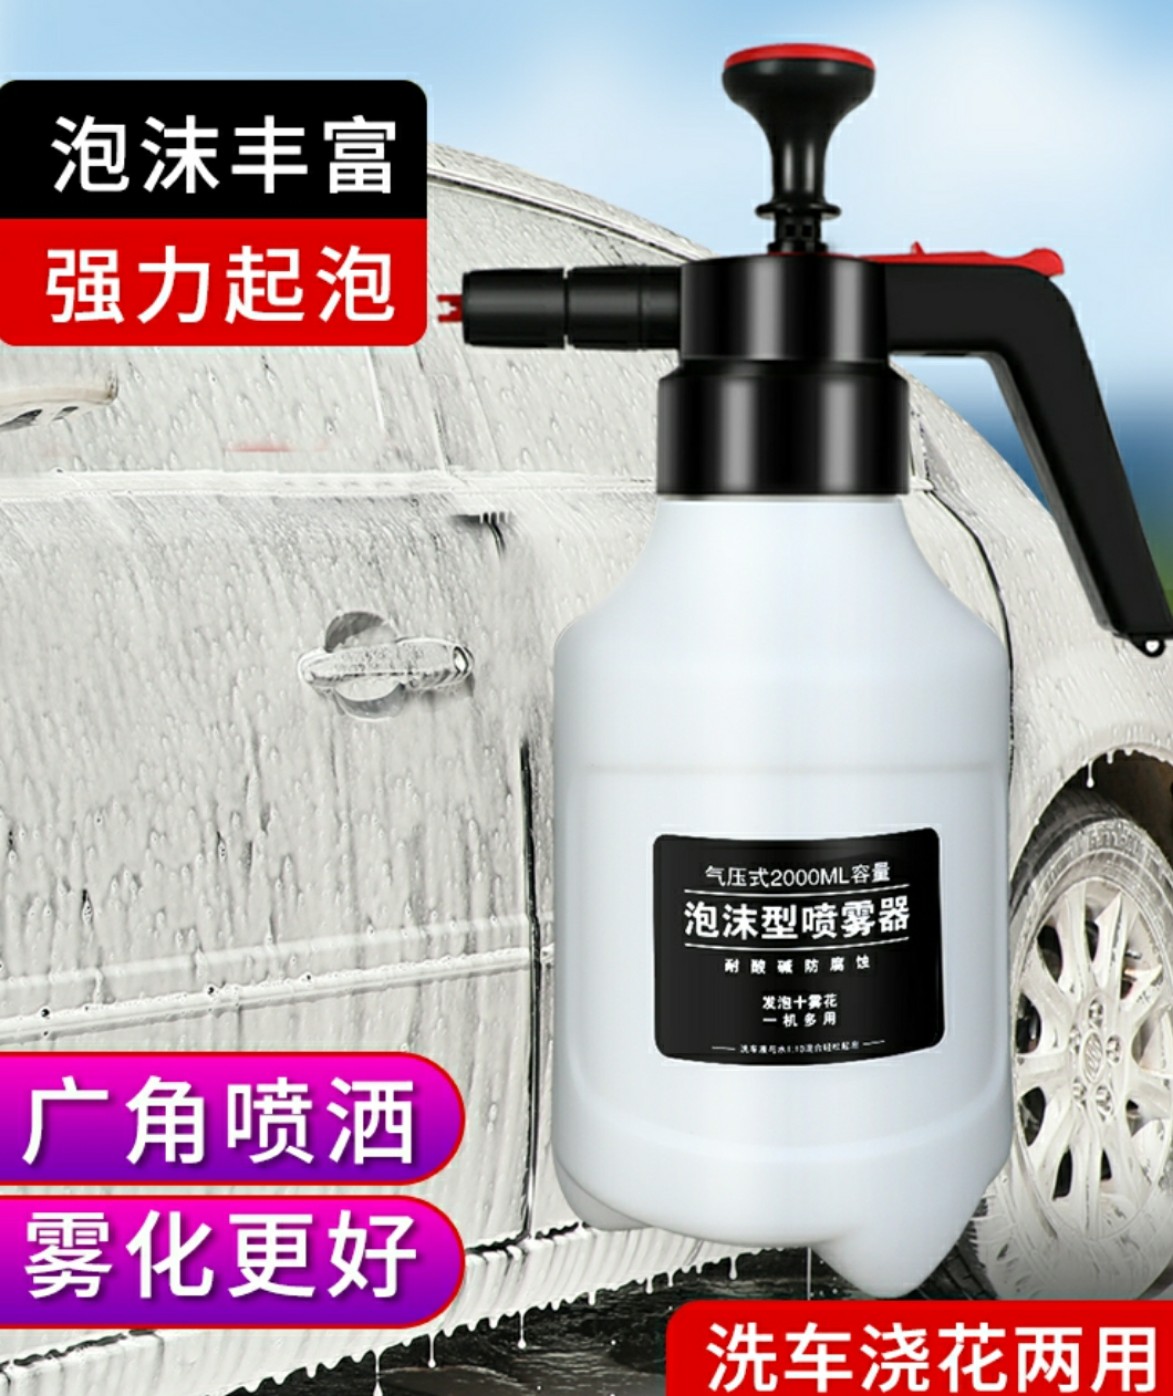 Foam Cannon Without Pressure washer,1.5L Bottle, Hand Pump SFS001